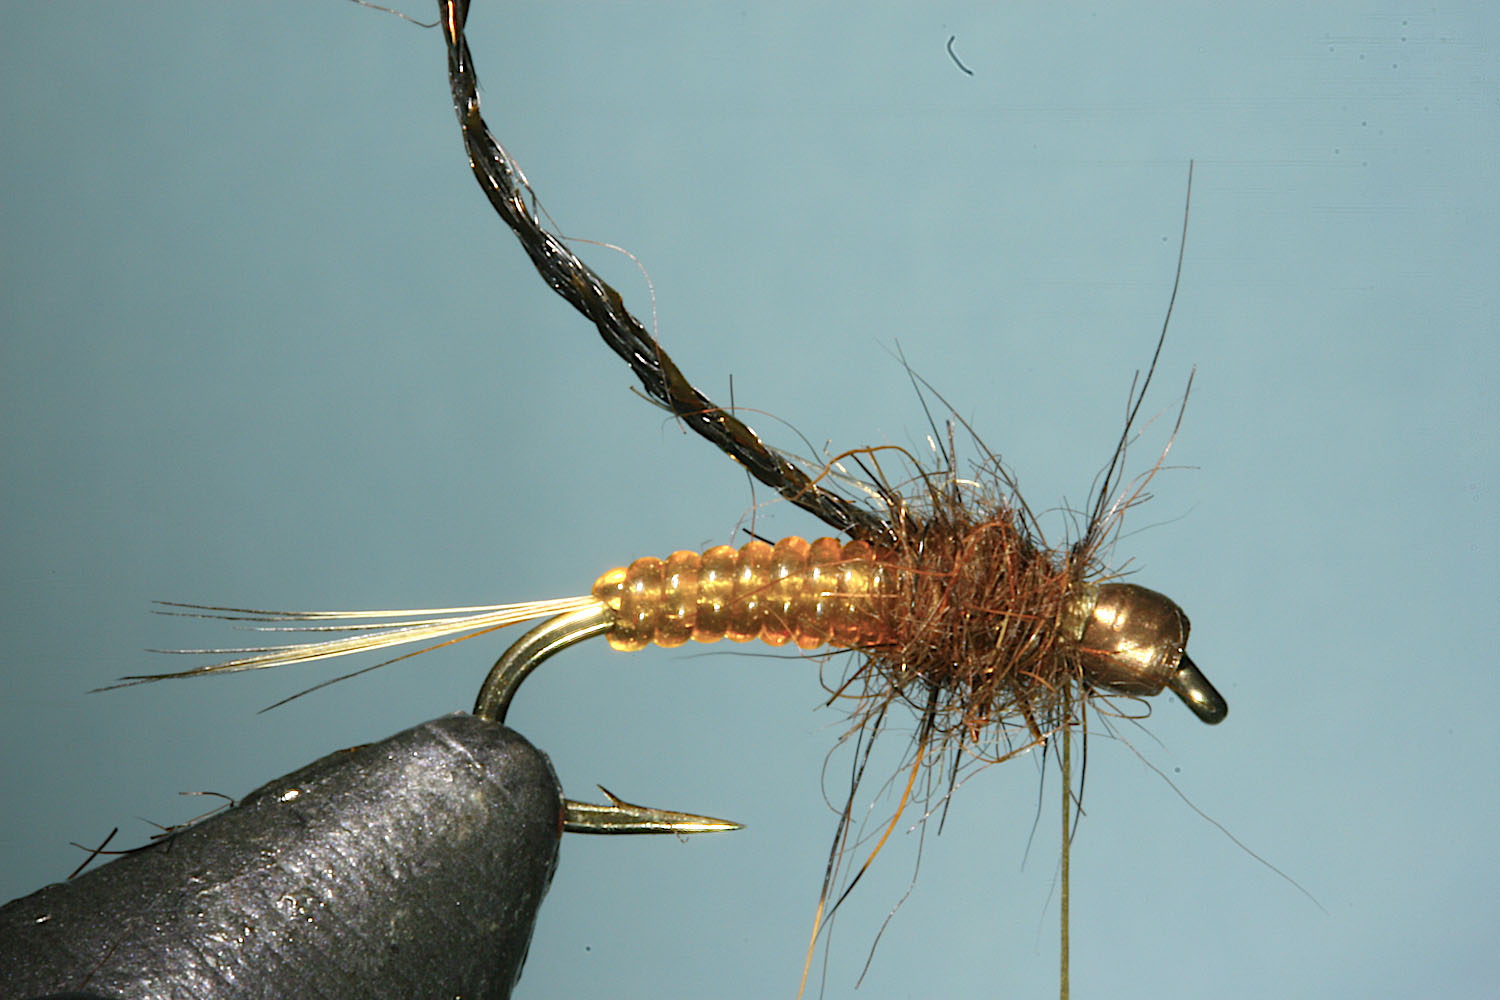 Step 7 of tying sequence for jelly crimp nymph fly